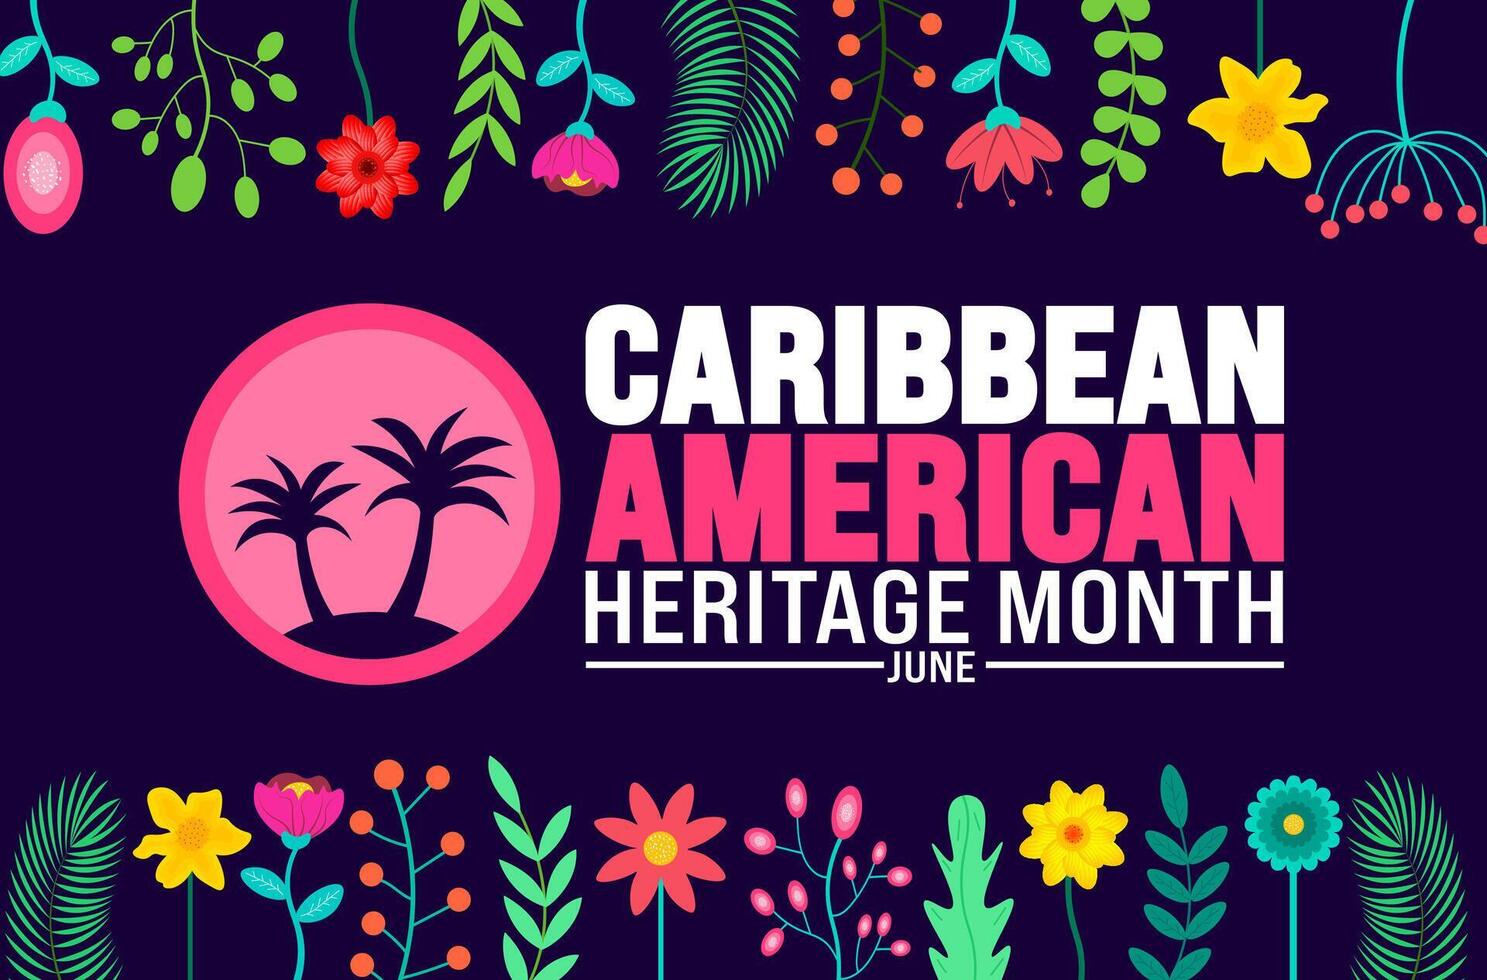 June is Caribbean American Heritage Month palm tree background template. Holiday concept. use to background, banner, placard, card, and poster design template with text inscription vector